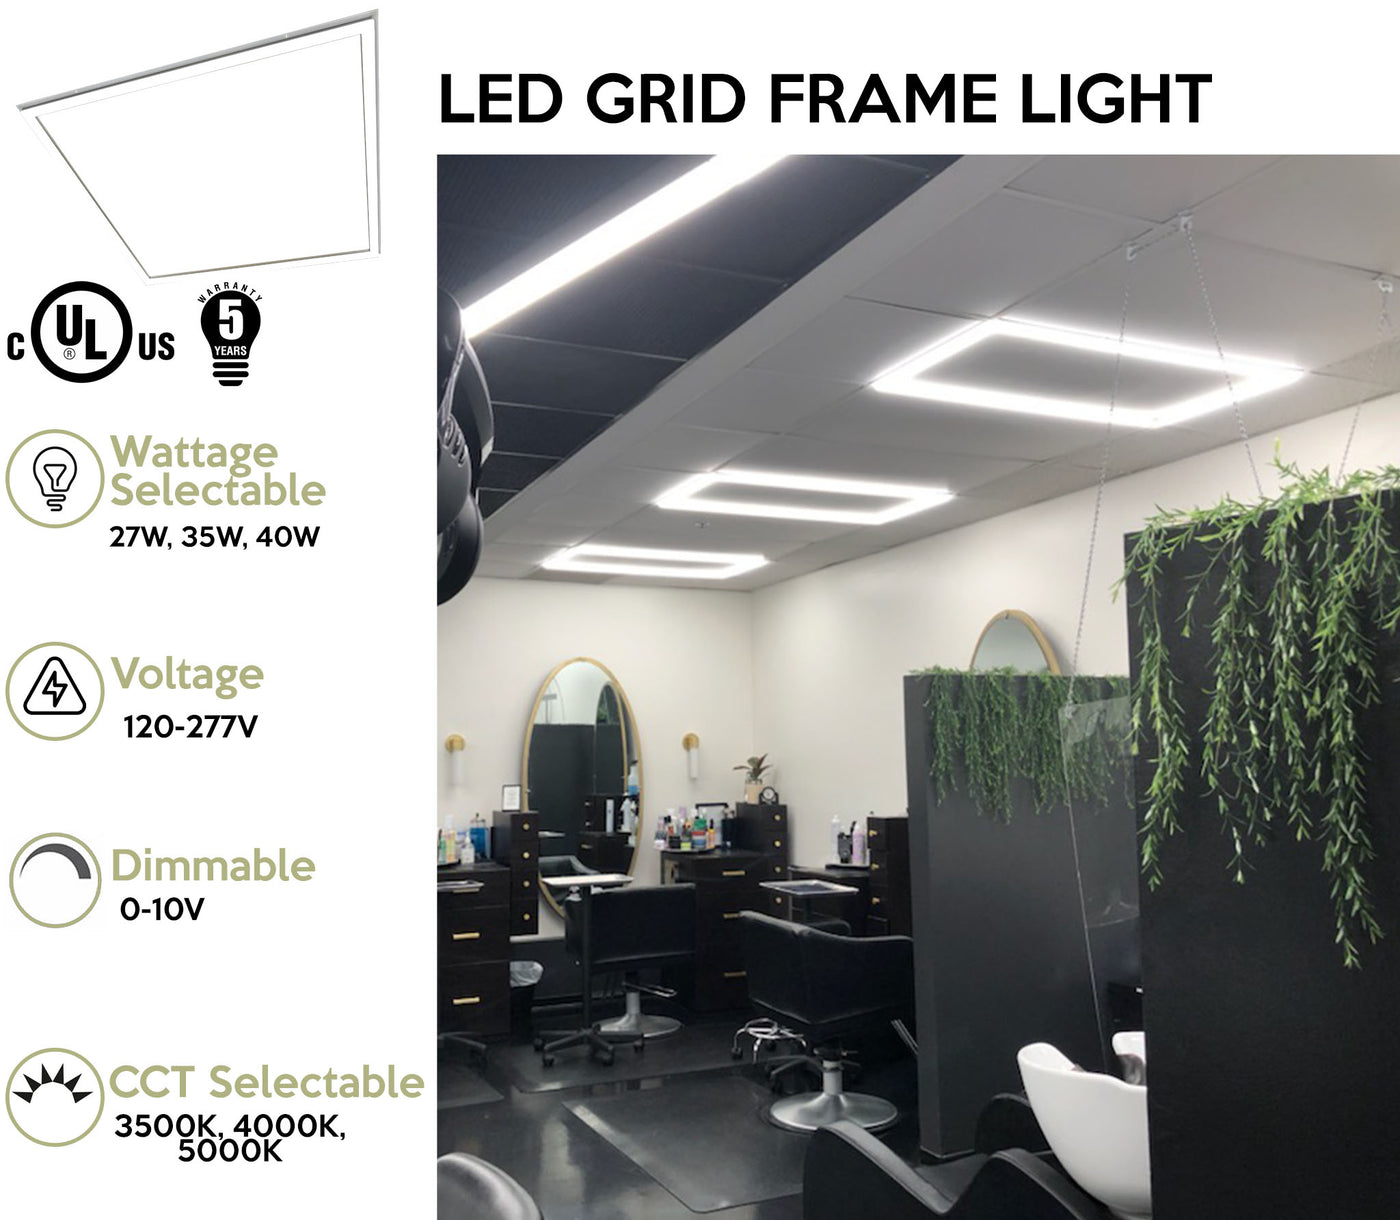 2 x 2 Foot LED Grid Frame Light, 120-277V, Selectable Wattage and CCT